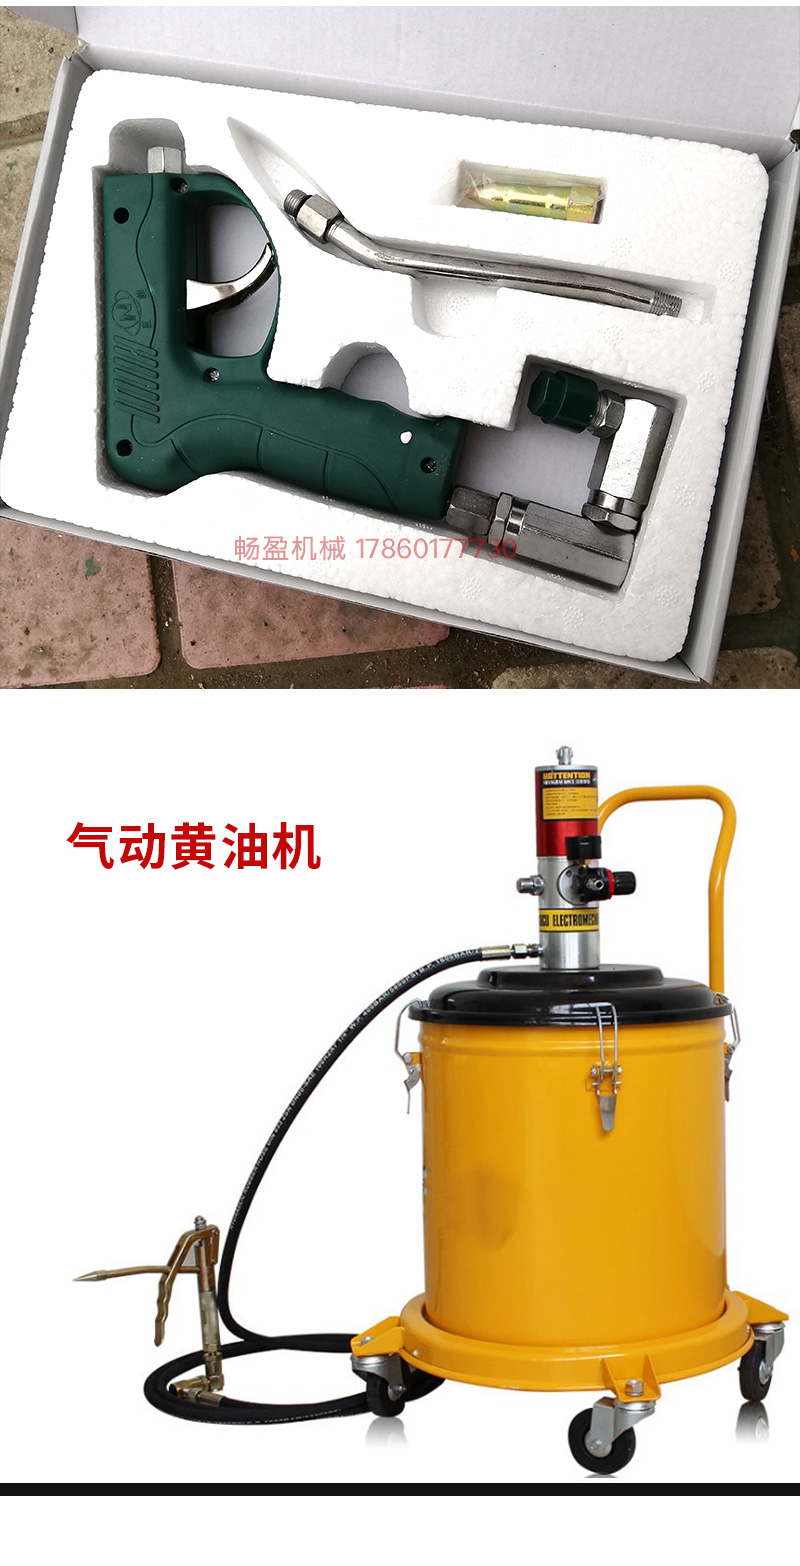 High voltage electric butter machine 220V oil injection machine precise and uniform oil output, lubricating oil lubrication, fully automatic small oil injection